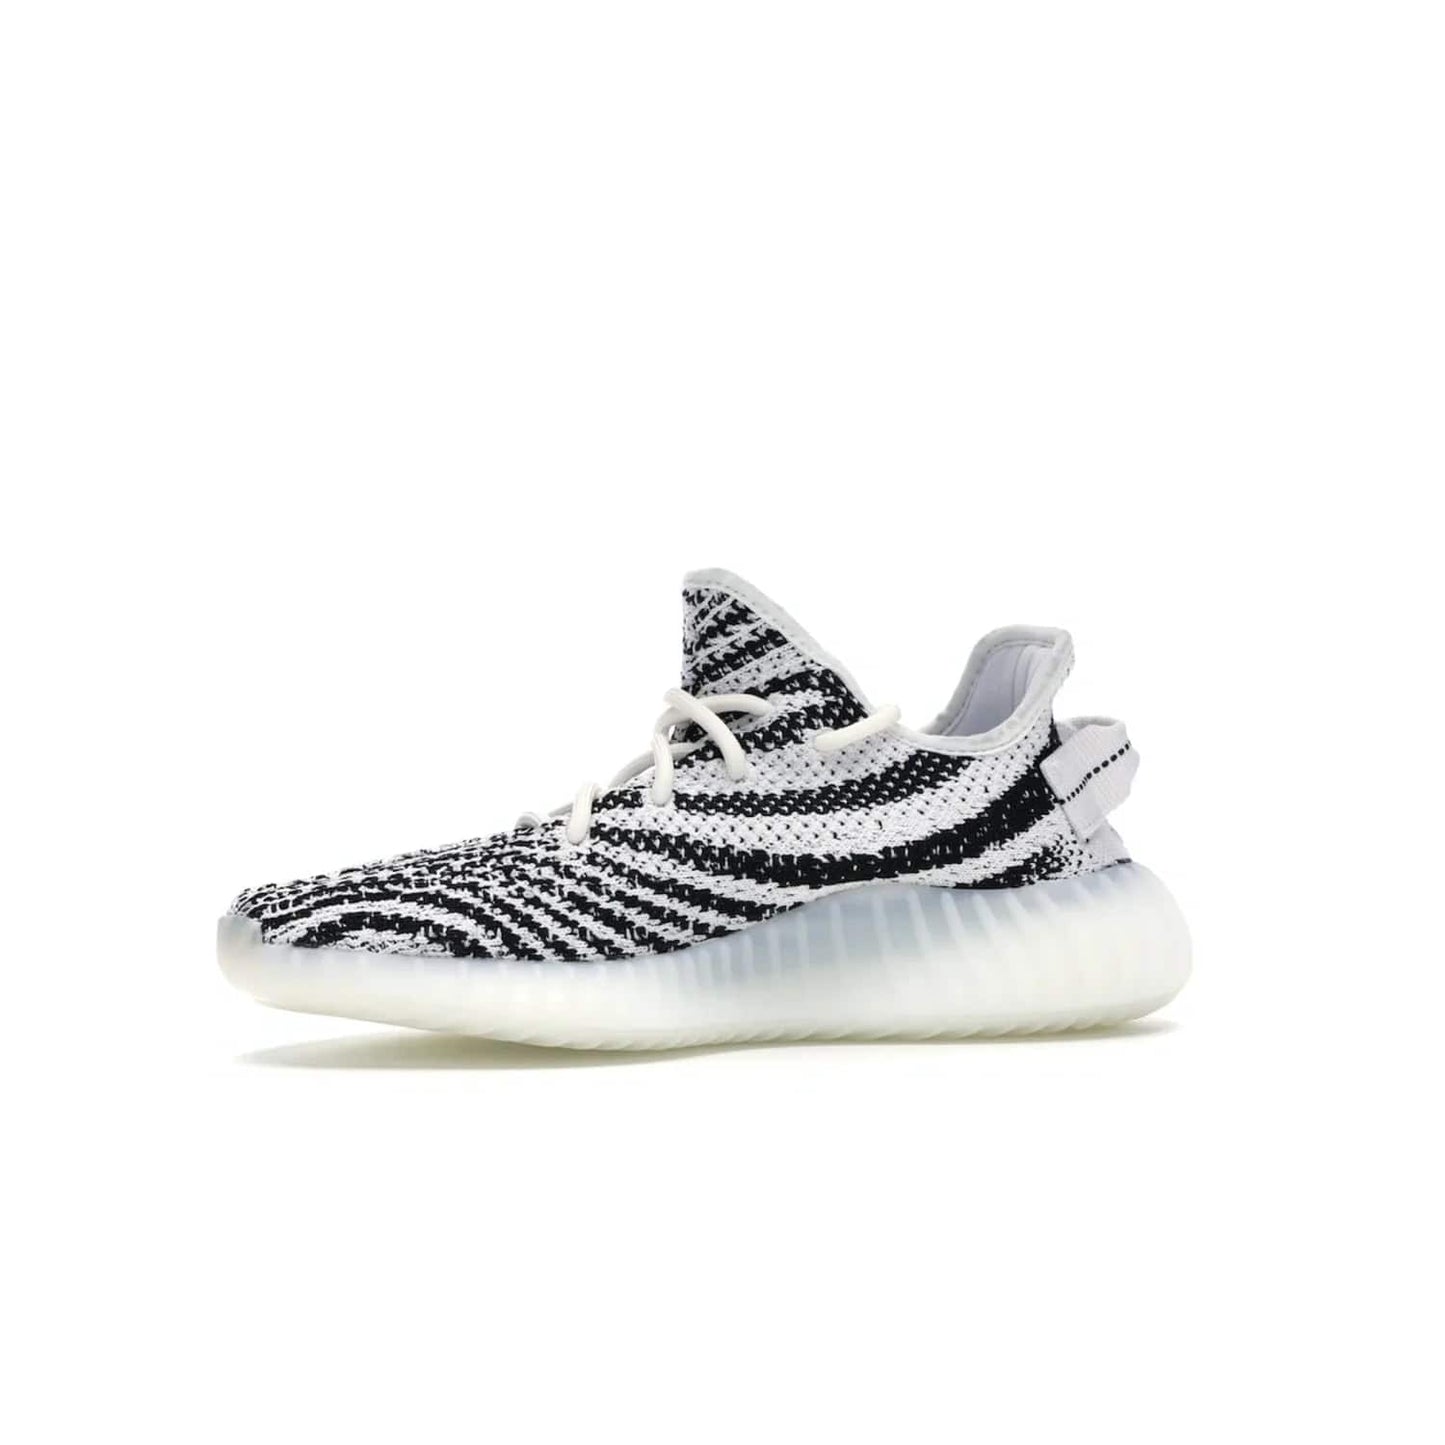 adidas Yeezy Boost 350 V2 Zebra - Image 17 - Only at www.BallersClubKickz.com - #
Score the iconic adidas Yeezy Boost 350 V2 Zebra for a fashionable addition to your street-style. Featuring a Primeknit upper and Boost sole, you'll look great and feel comfortable with every step.